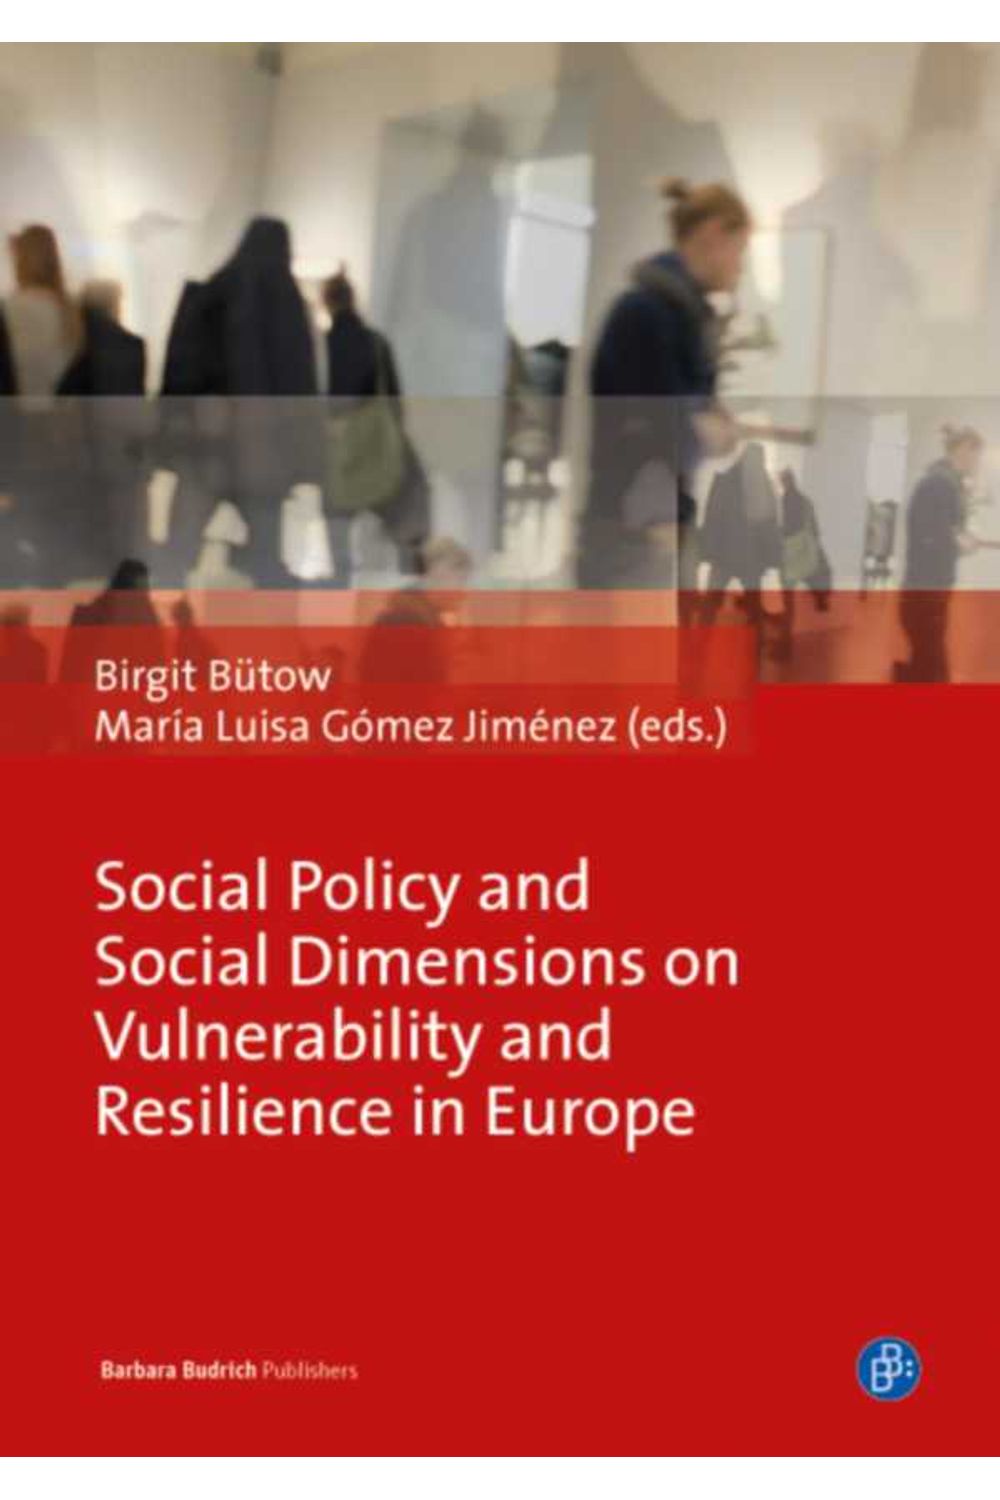 bw-social-policy-and-social-dimensions-on-vulnerability-and-resilience-in-europe-verlag-barbara-budrich-9783847404545